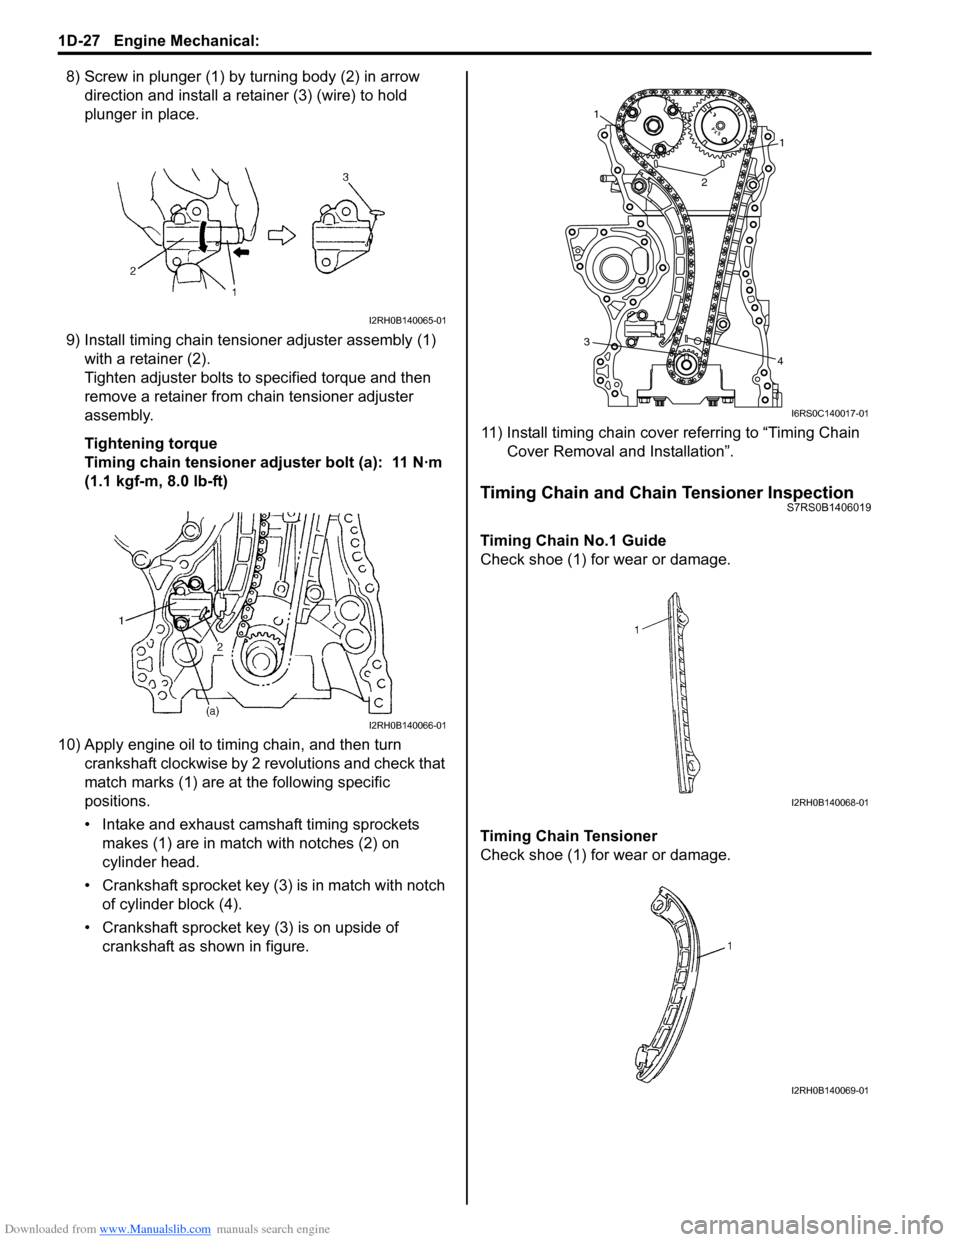 SUZUKI SWIFT 2007 2.G Service Workshop Manual Downloaded from www.Manualslib.com manuals search engine 1D-27 Engine Mechanical: 
8) Screw in plunger (1) by turning body (2) in arrow direction and install a reta iner (3) (wire) to hold 
plunger in